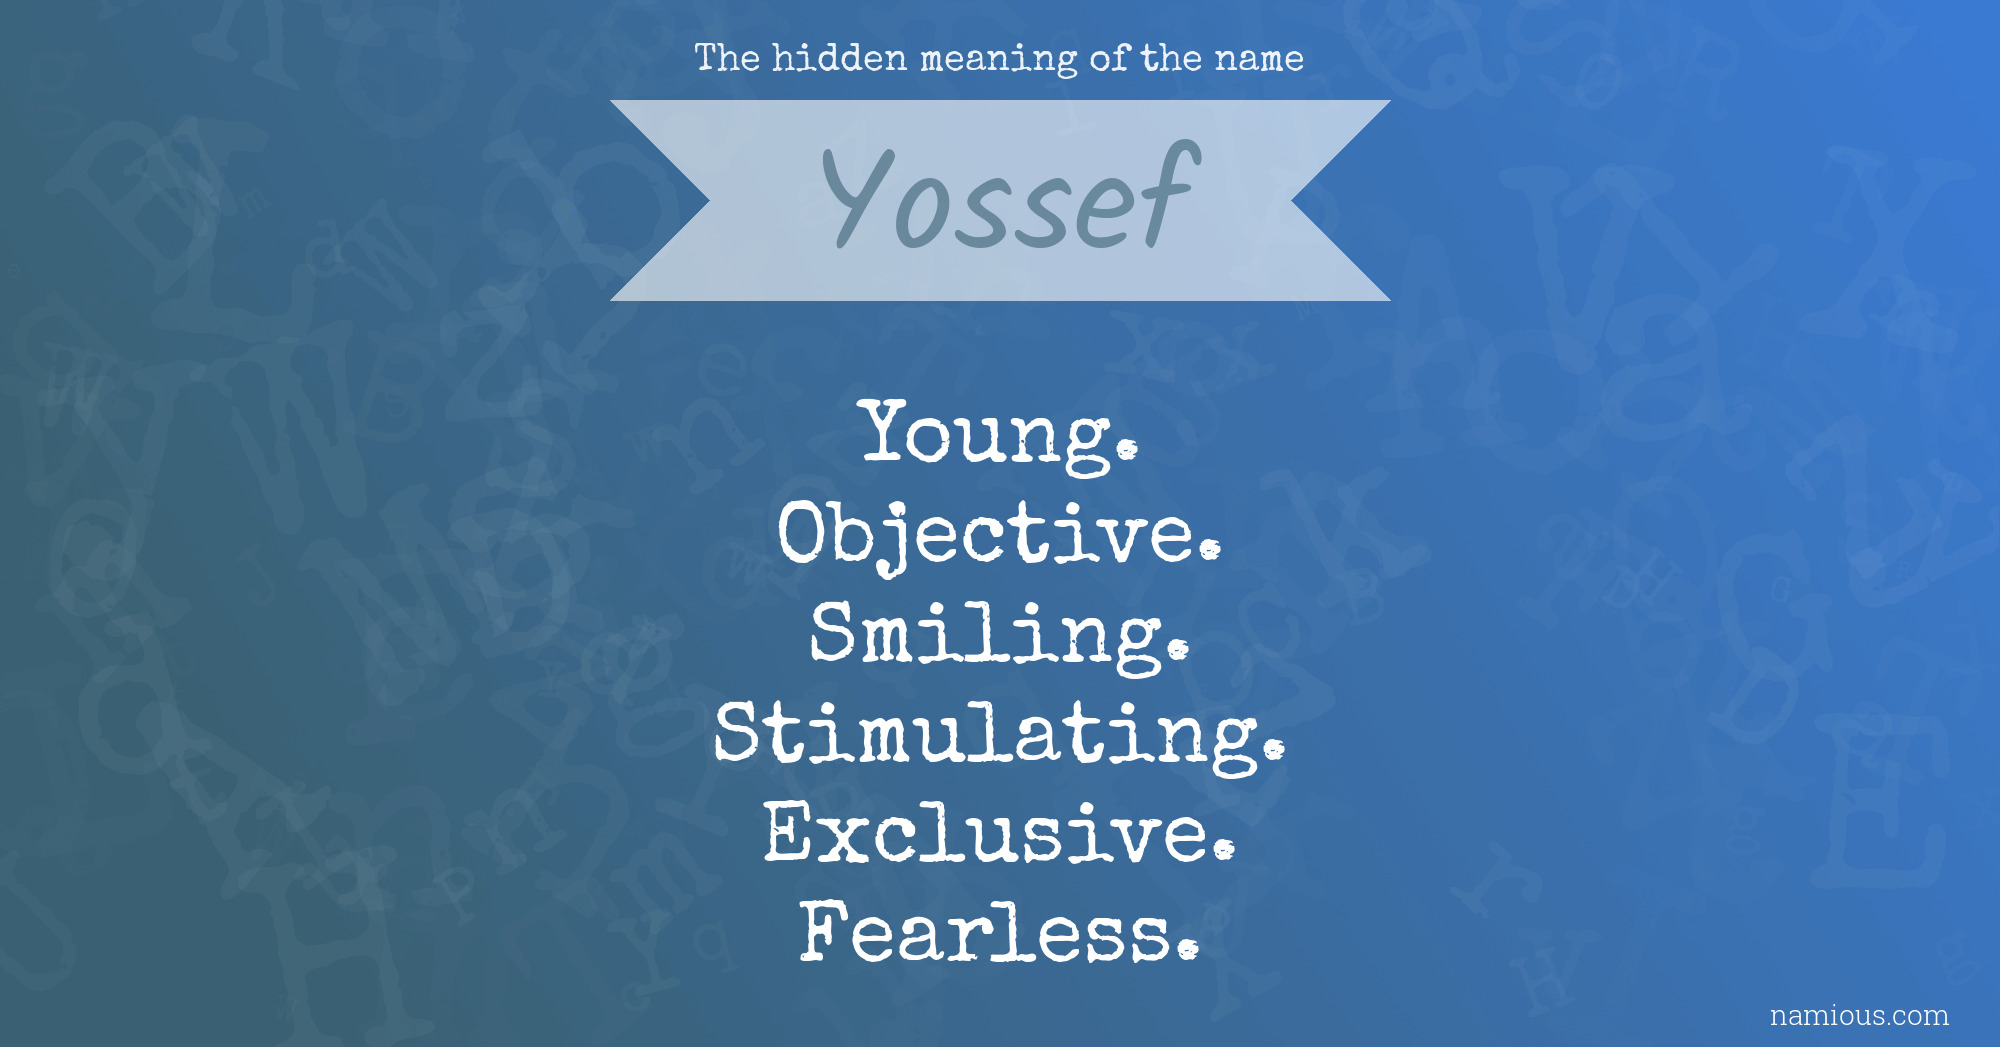 The hidden meaning of the name Yossef